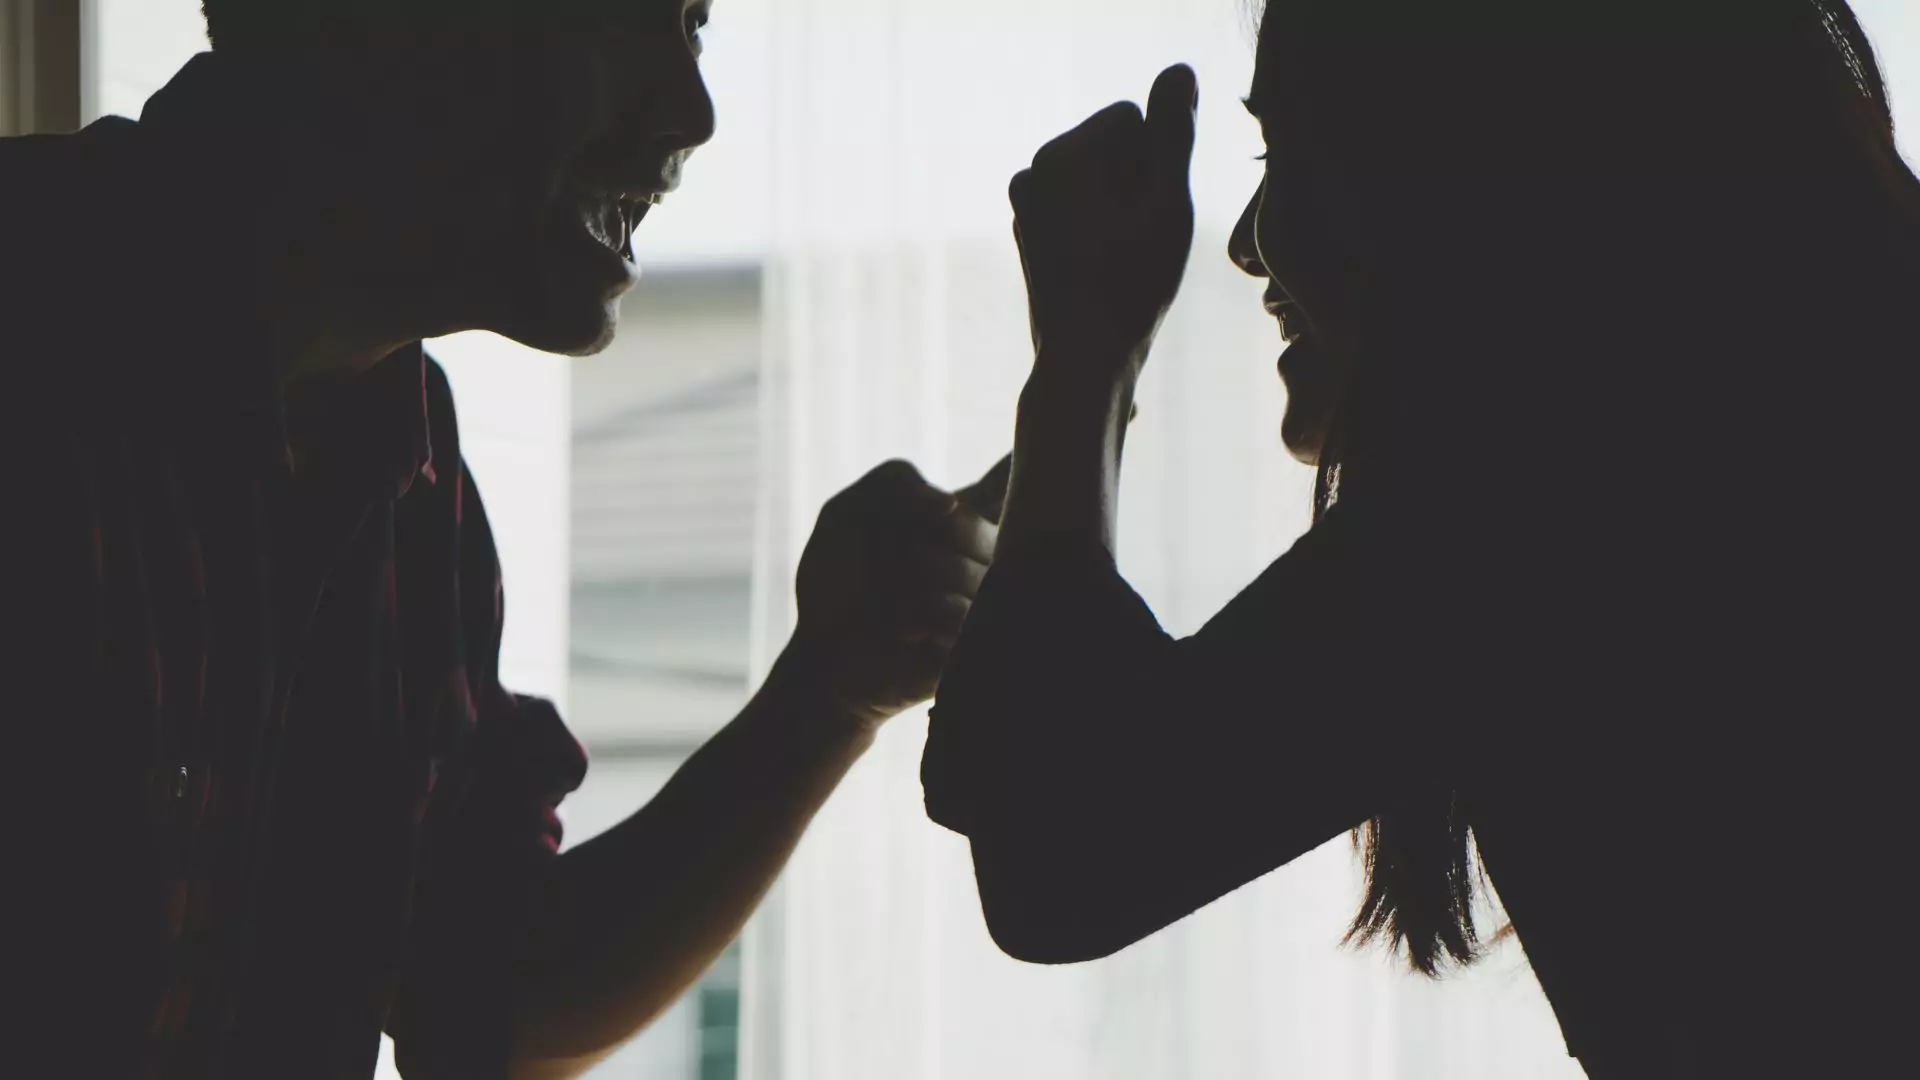 Silhouette of a couple fighting with their hands raised aggressively at each other, suggesting but not depicting physical abuse.